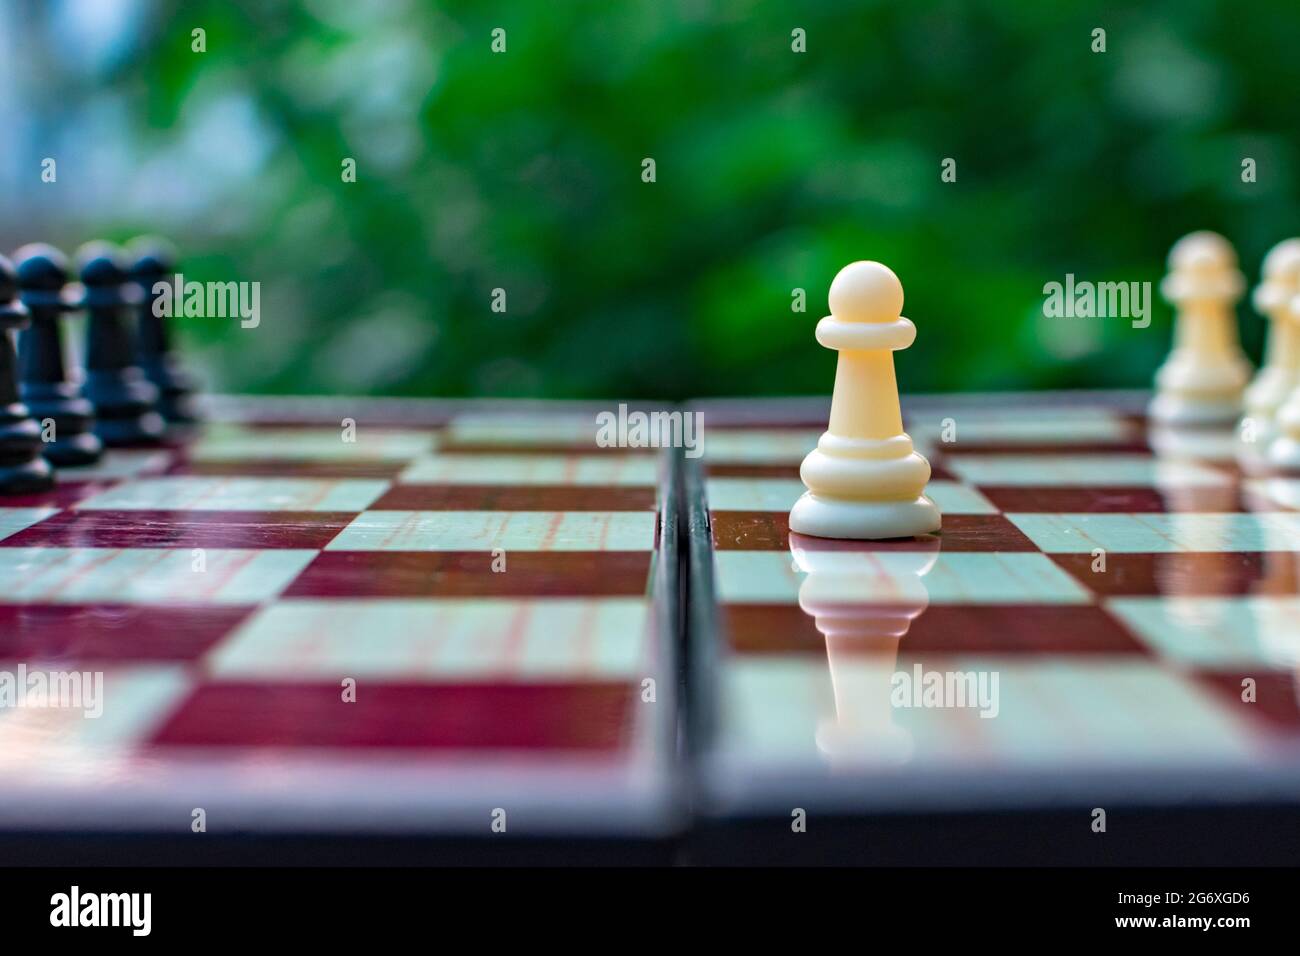 Chess pieces are placed on a chessboard close-up on a blurred background of nature. White pawn on a chessboard. Blurred focus. Defocus. Shehamat day. Stock Photo